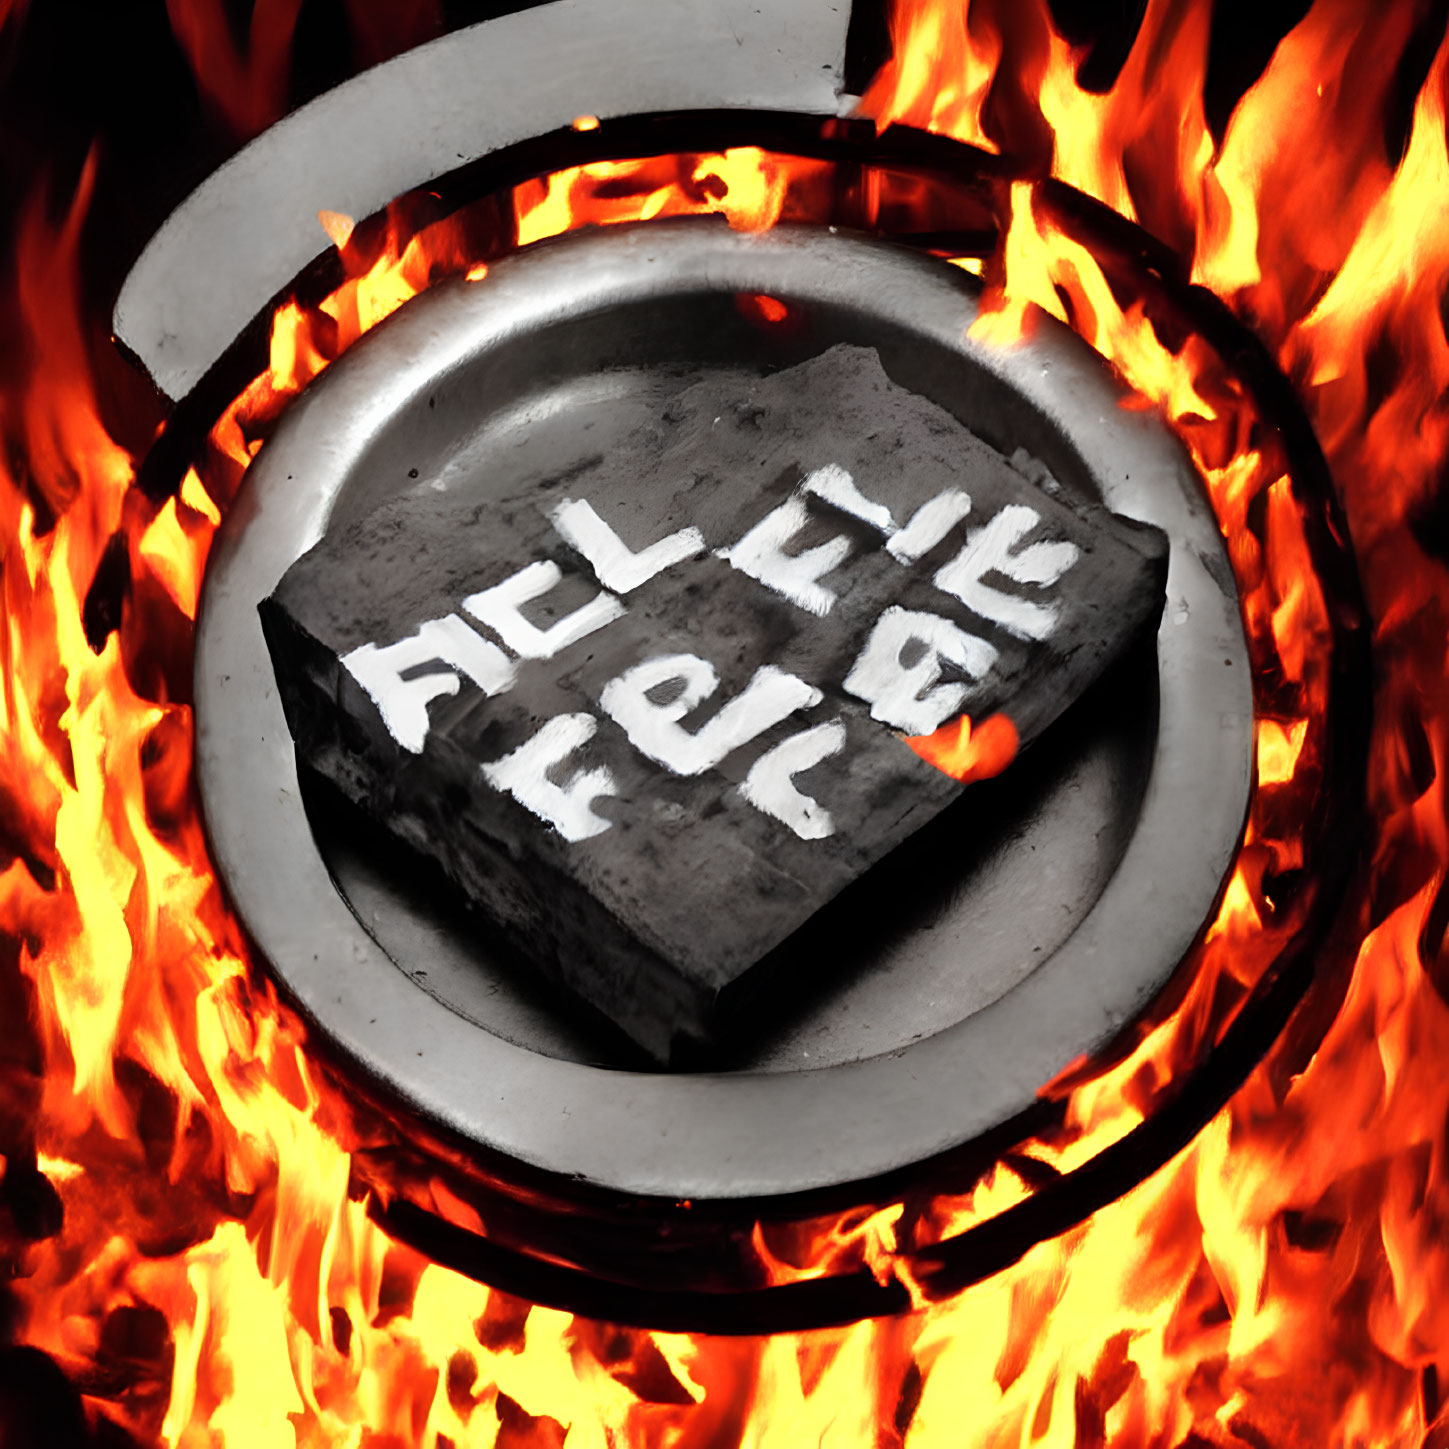 Metallic object with "FE" inscription heating in fiery forge.